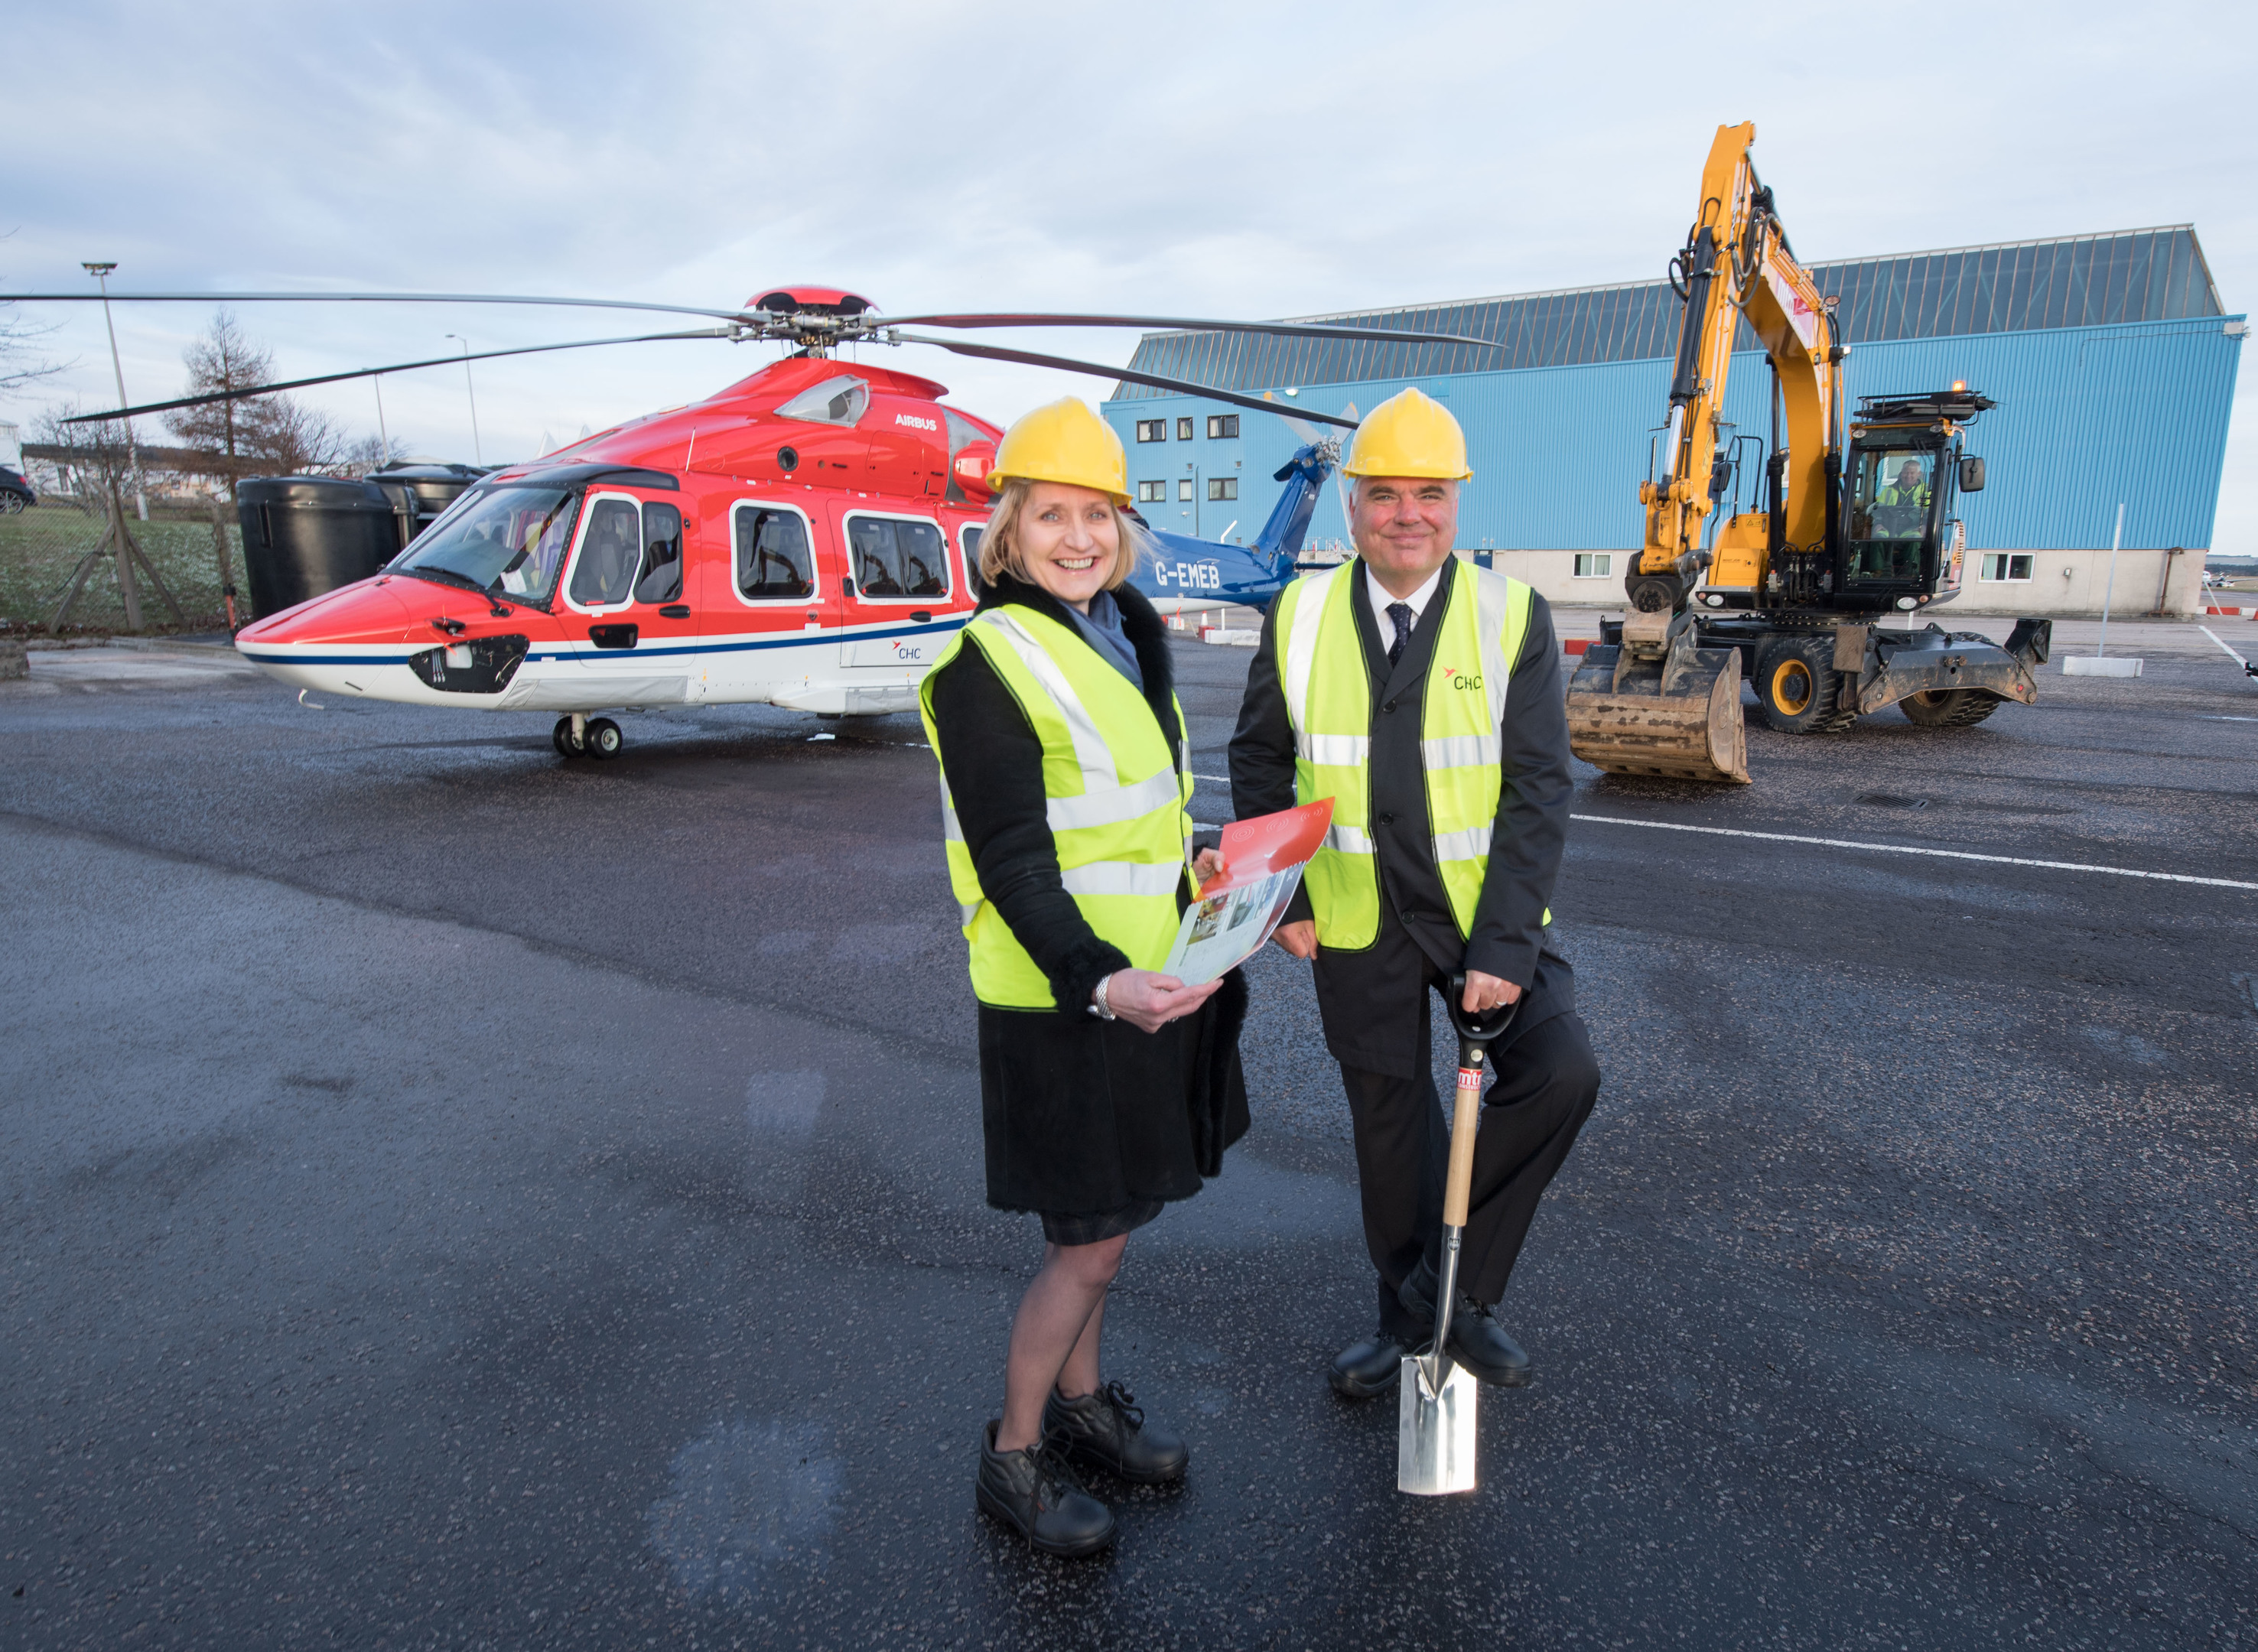 OGUK chief executive Deirdre Michie and CHC regional director Mark Abbey breaking ground as the revamp of CHC's heliport gets under way.